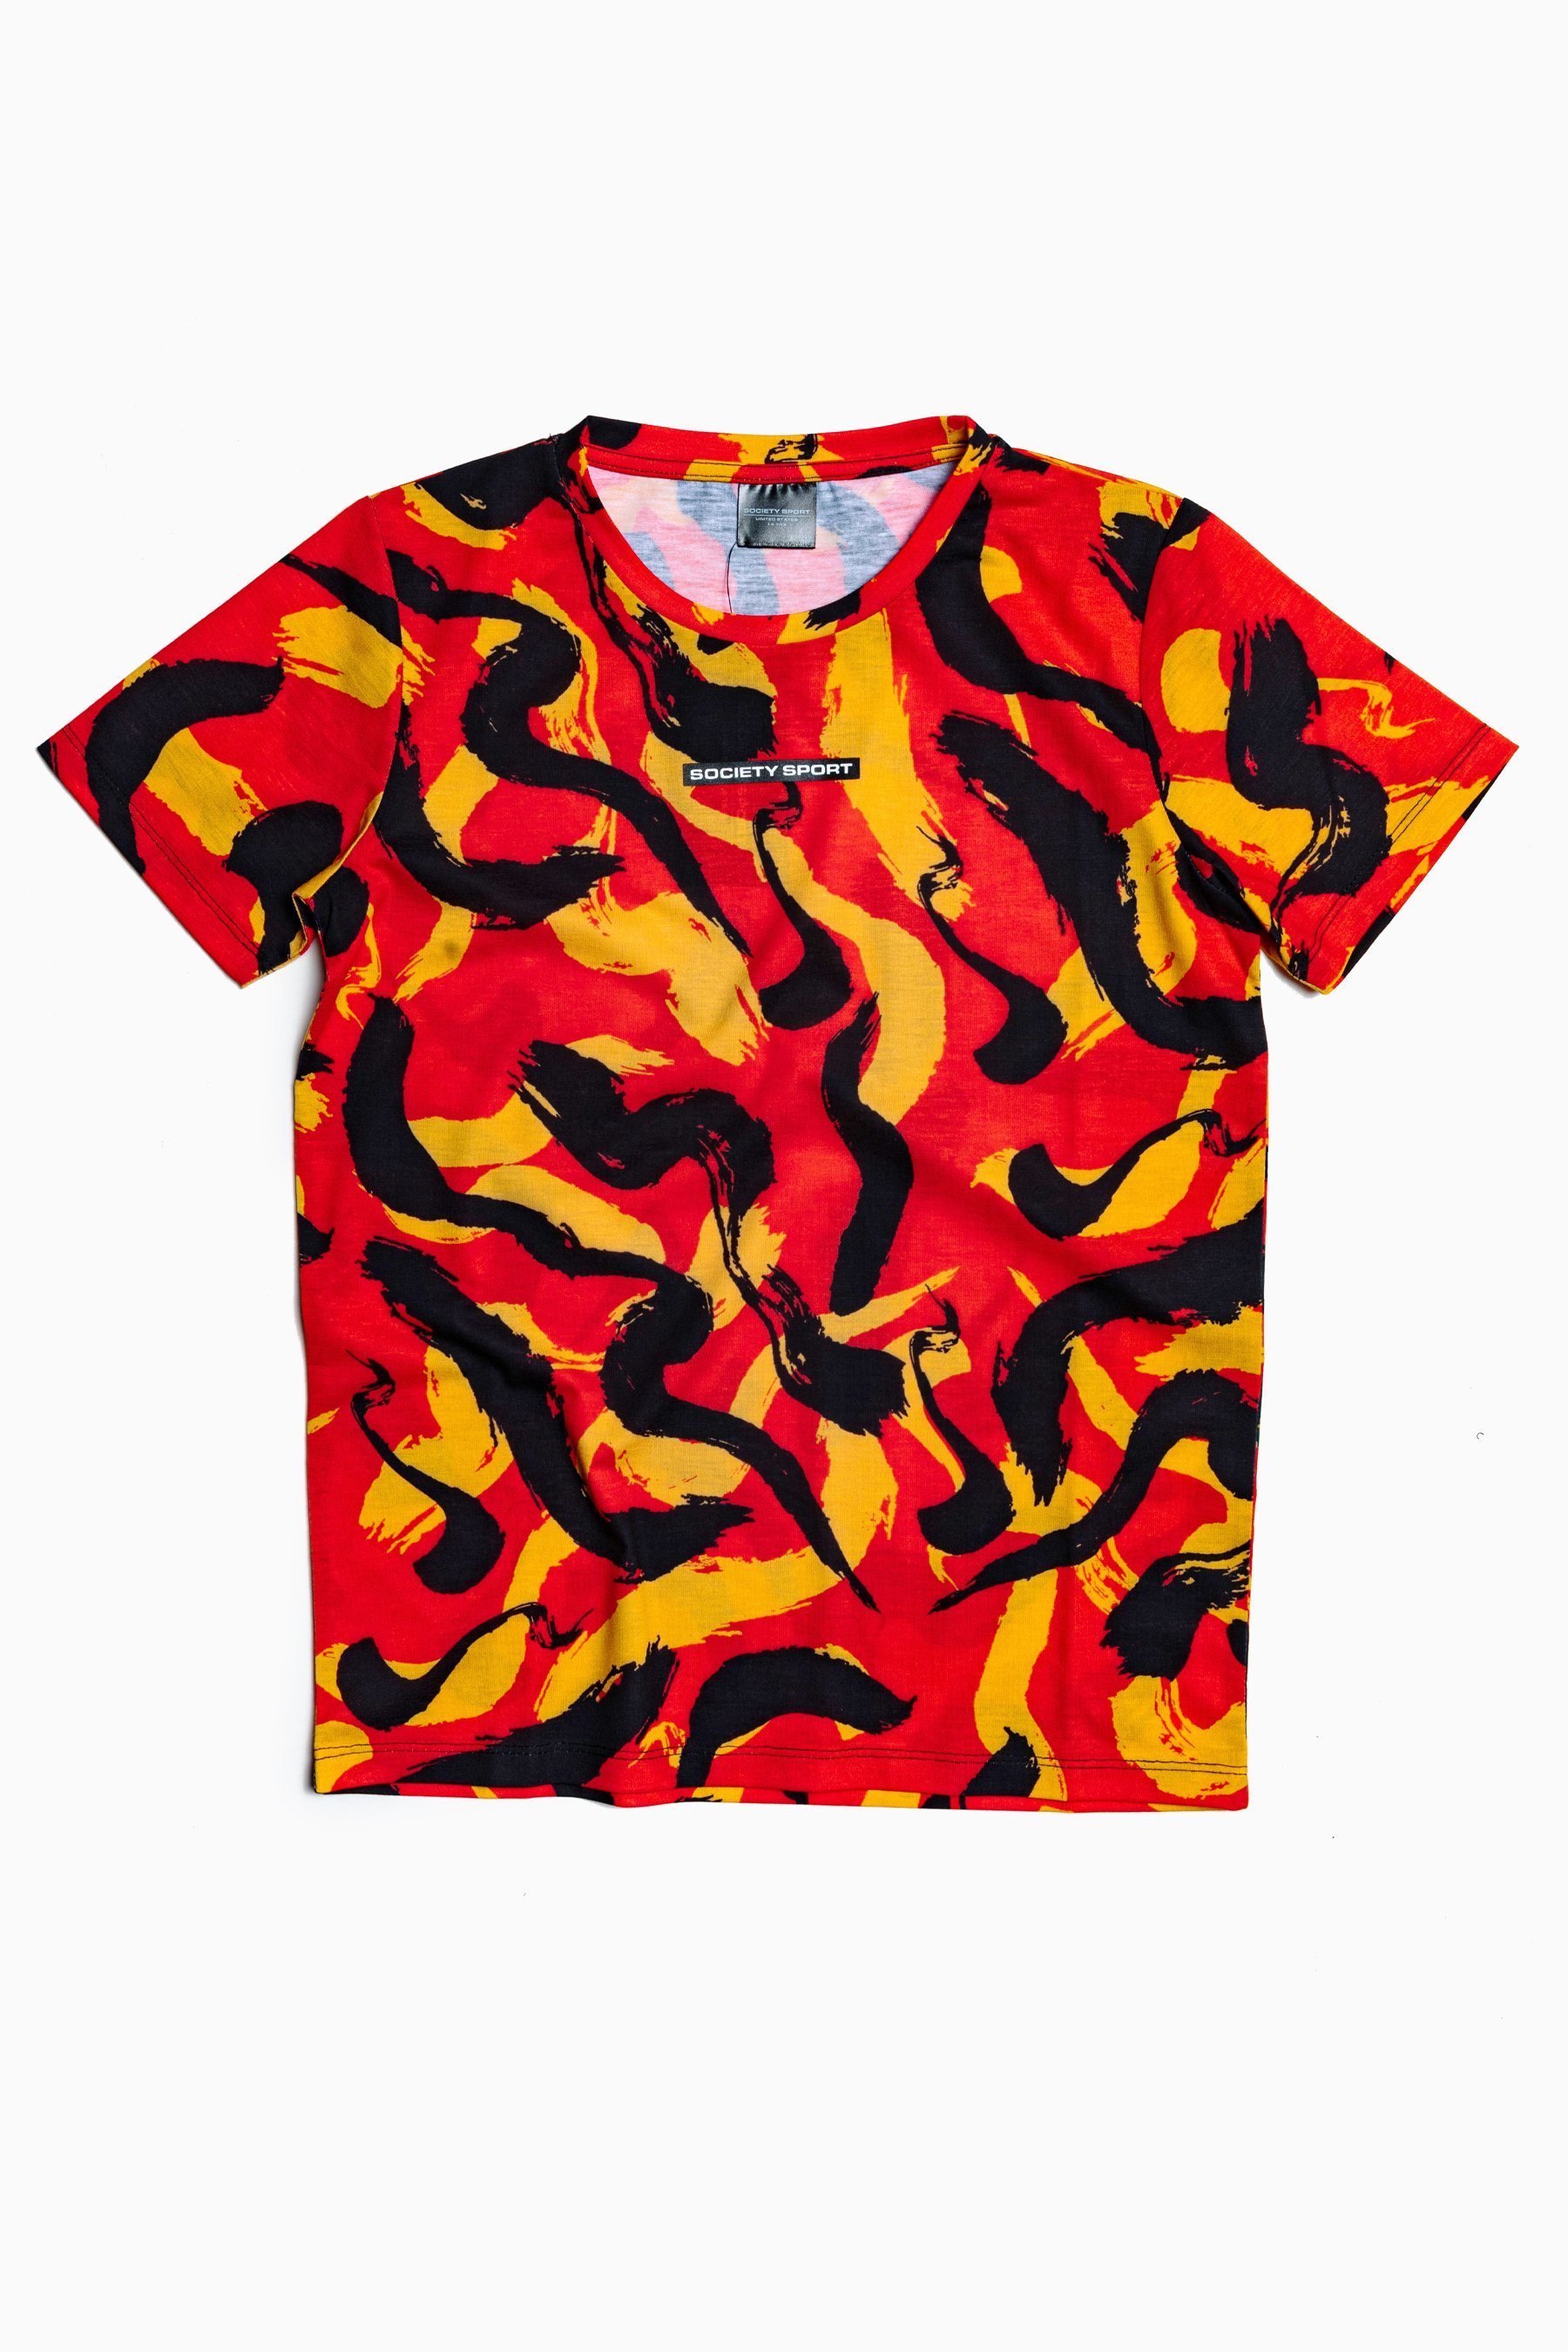 Hype Society Sport Squiggle Fire Multi T-Shirt | Size 9/10Y